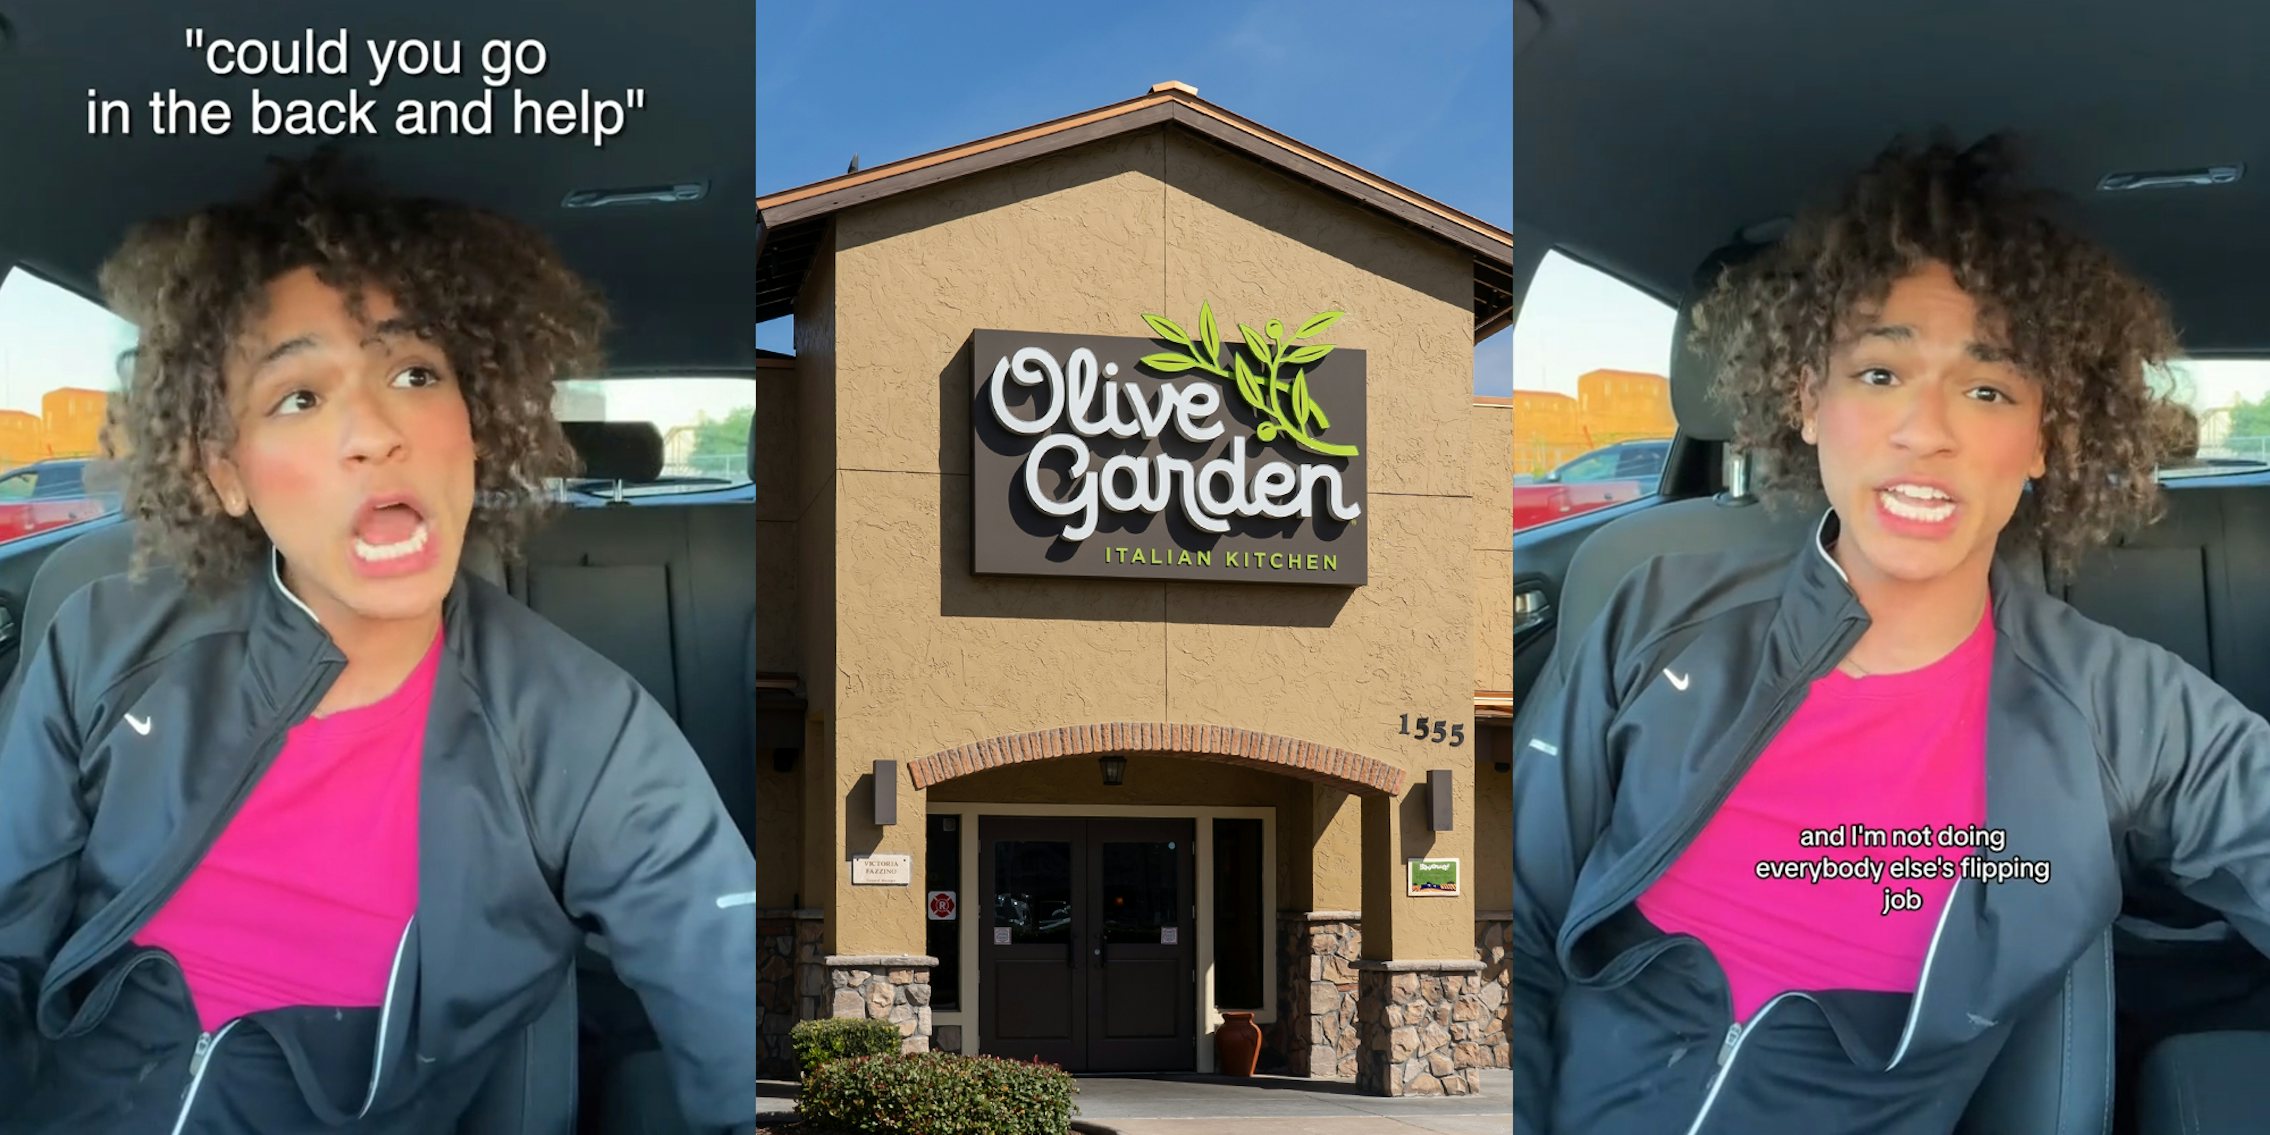 former Olive Garden employee speaking in car with caption ''could you go in the back and help'' (l) Olive Garden building with sign (c) former Olive Garden employee speaking in car with caption 'and I'm not doing everybody else's flipping job'